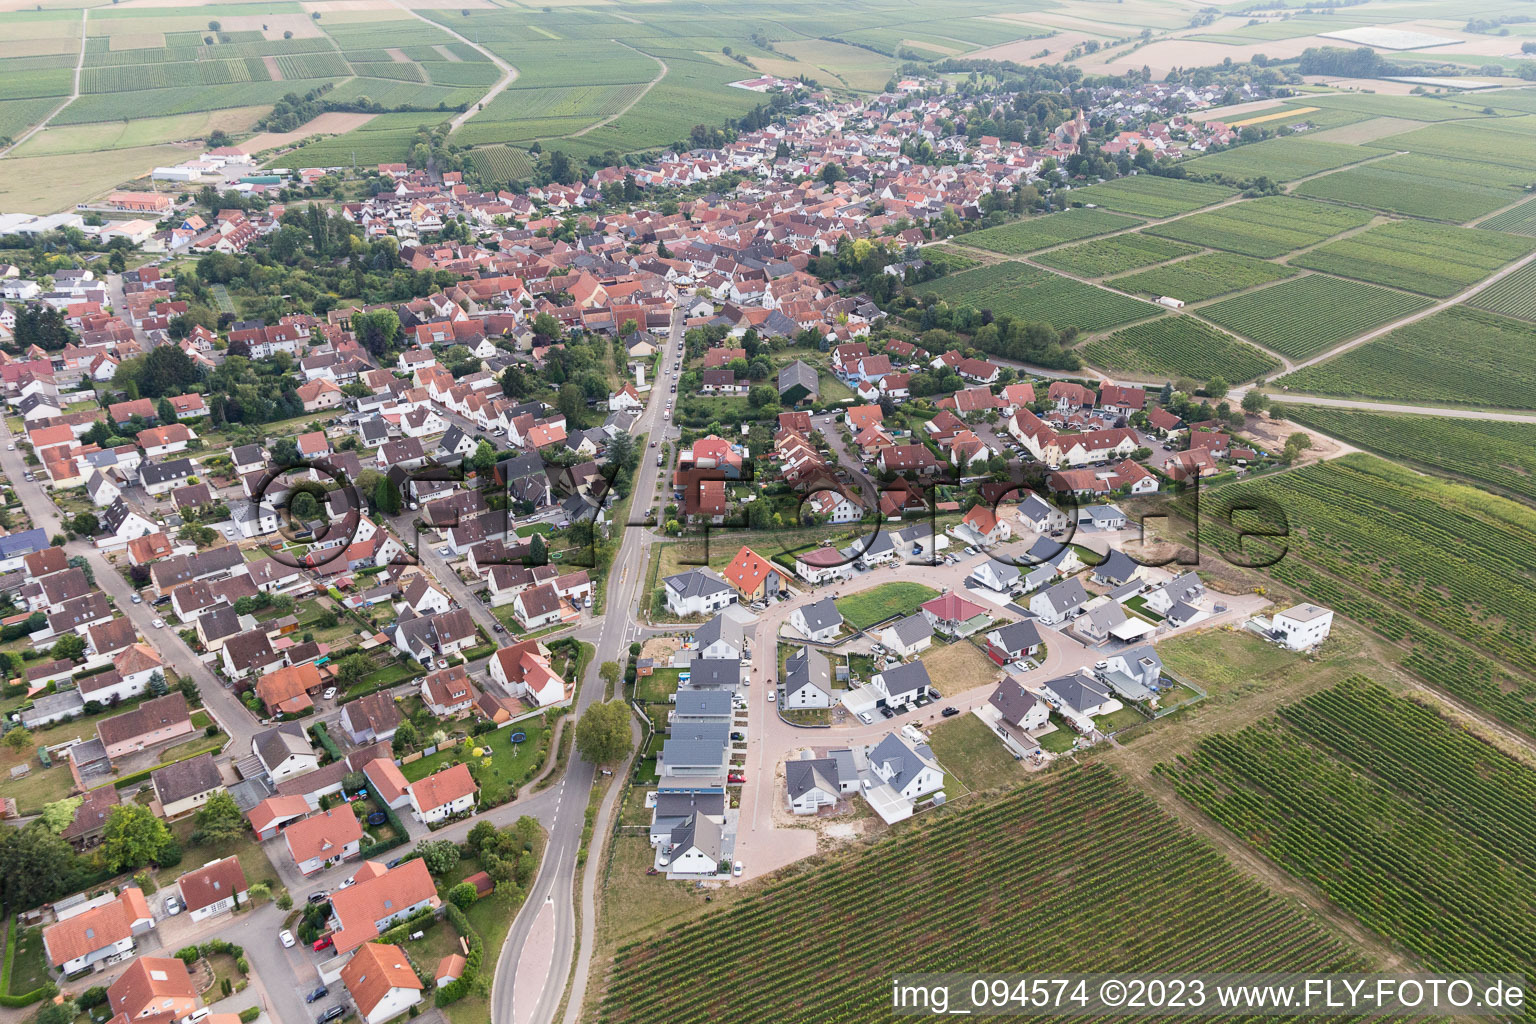 Aerial view of Insheim in the state Rhineland-Palatinate, Germany